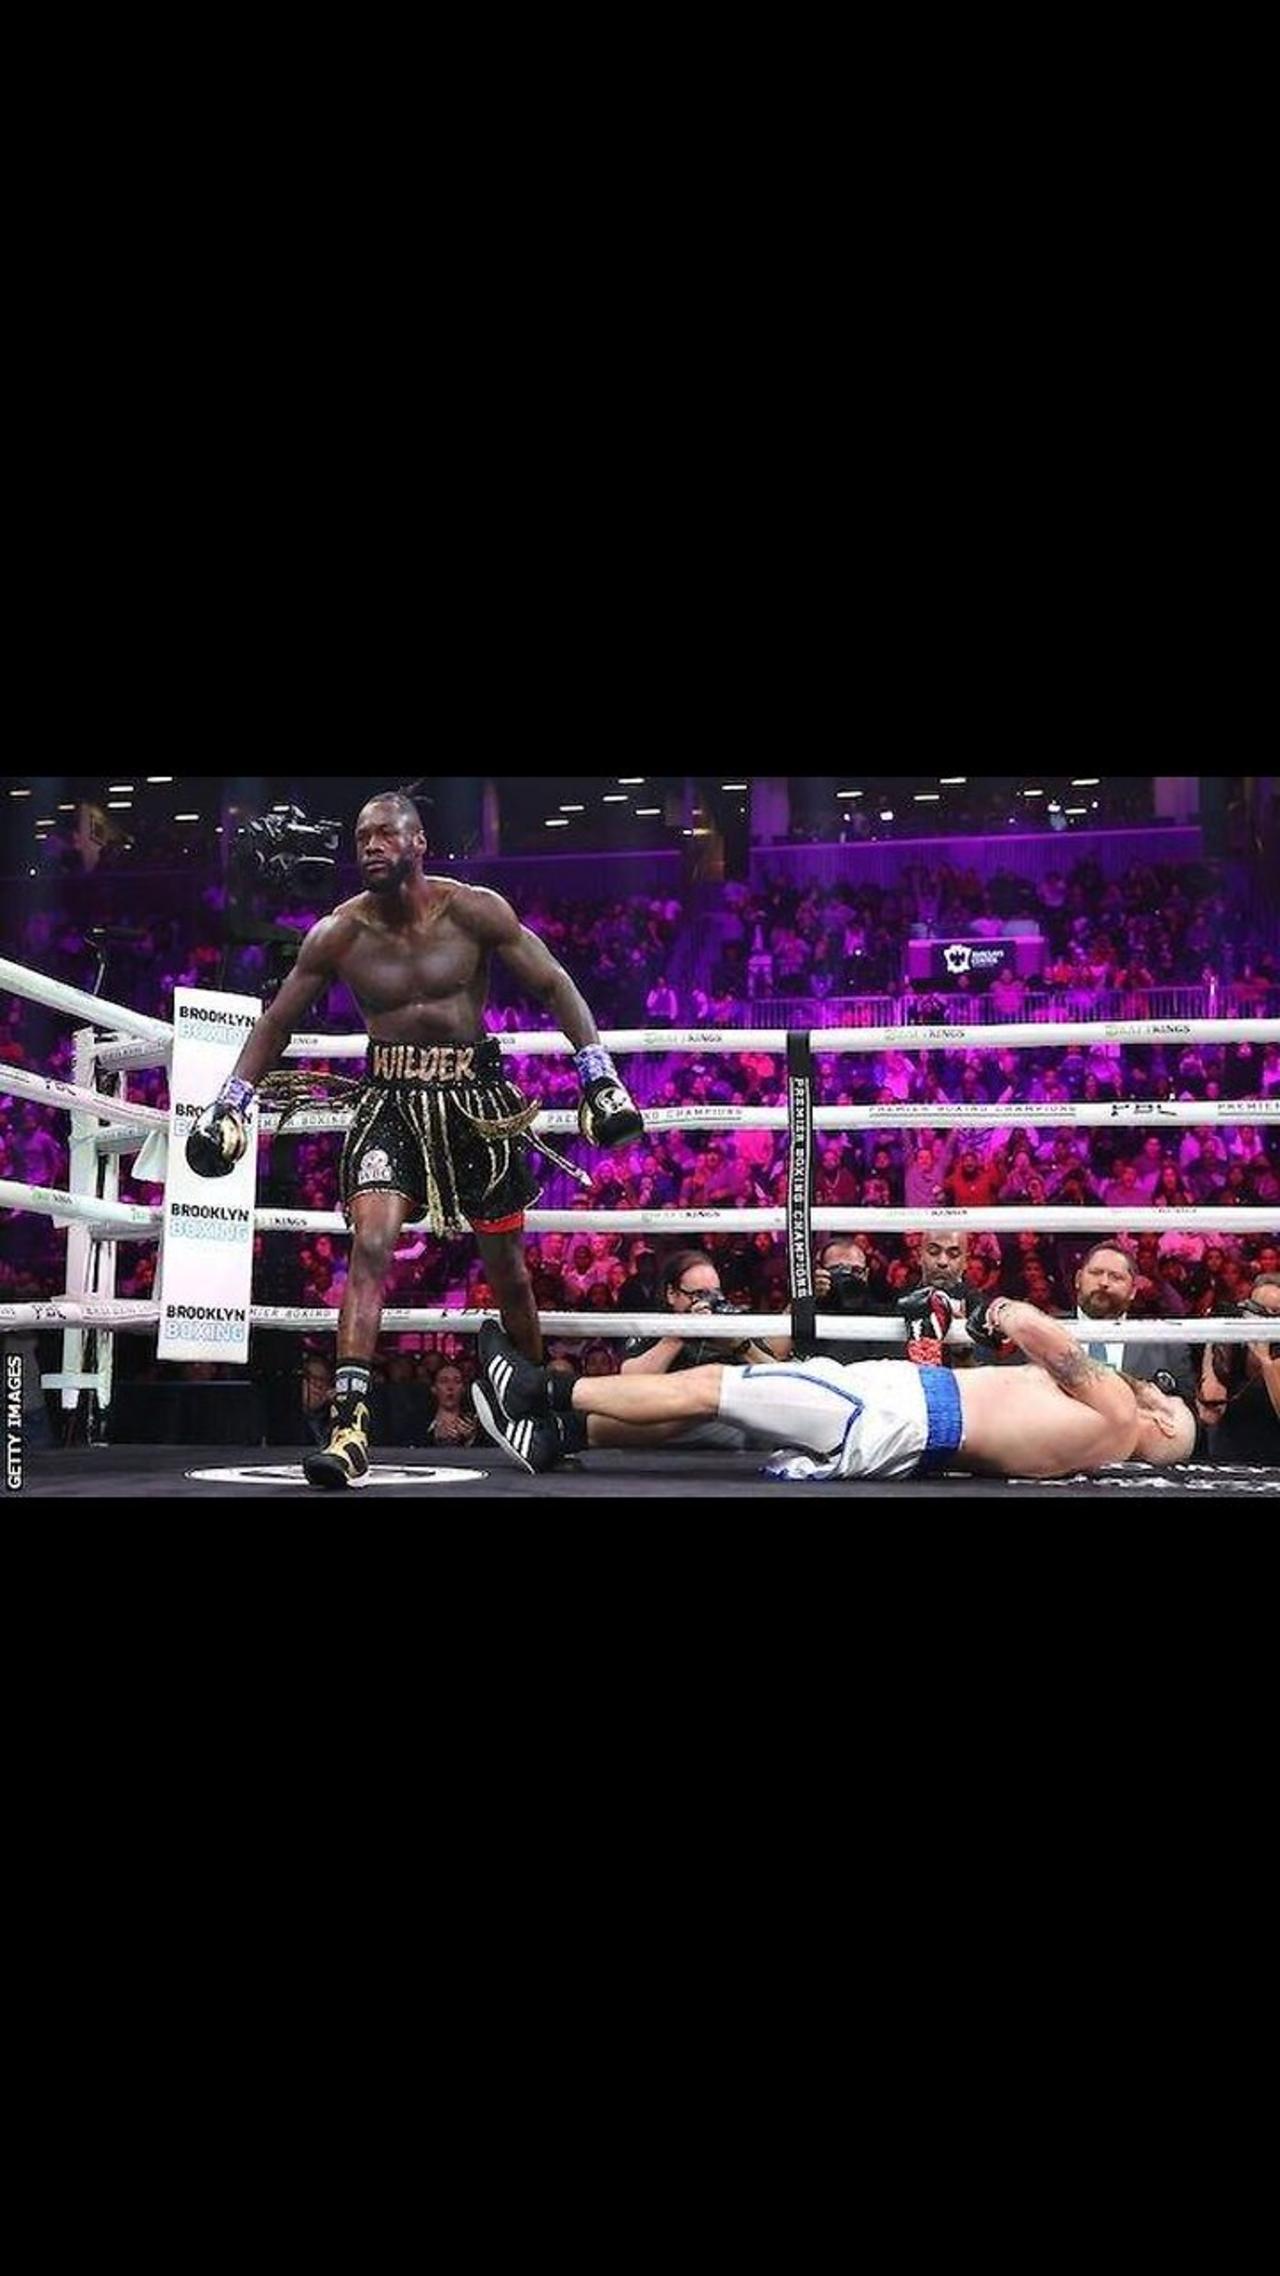 Will Deontay Wilder become a hall of famer....